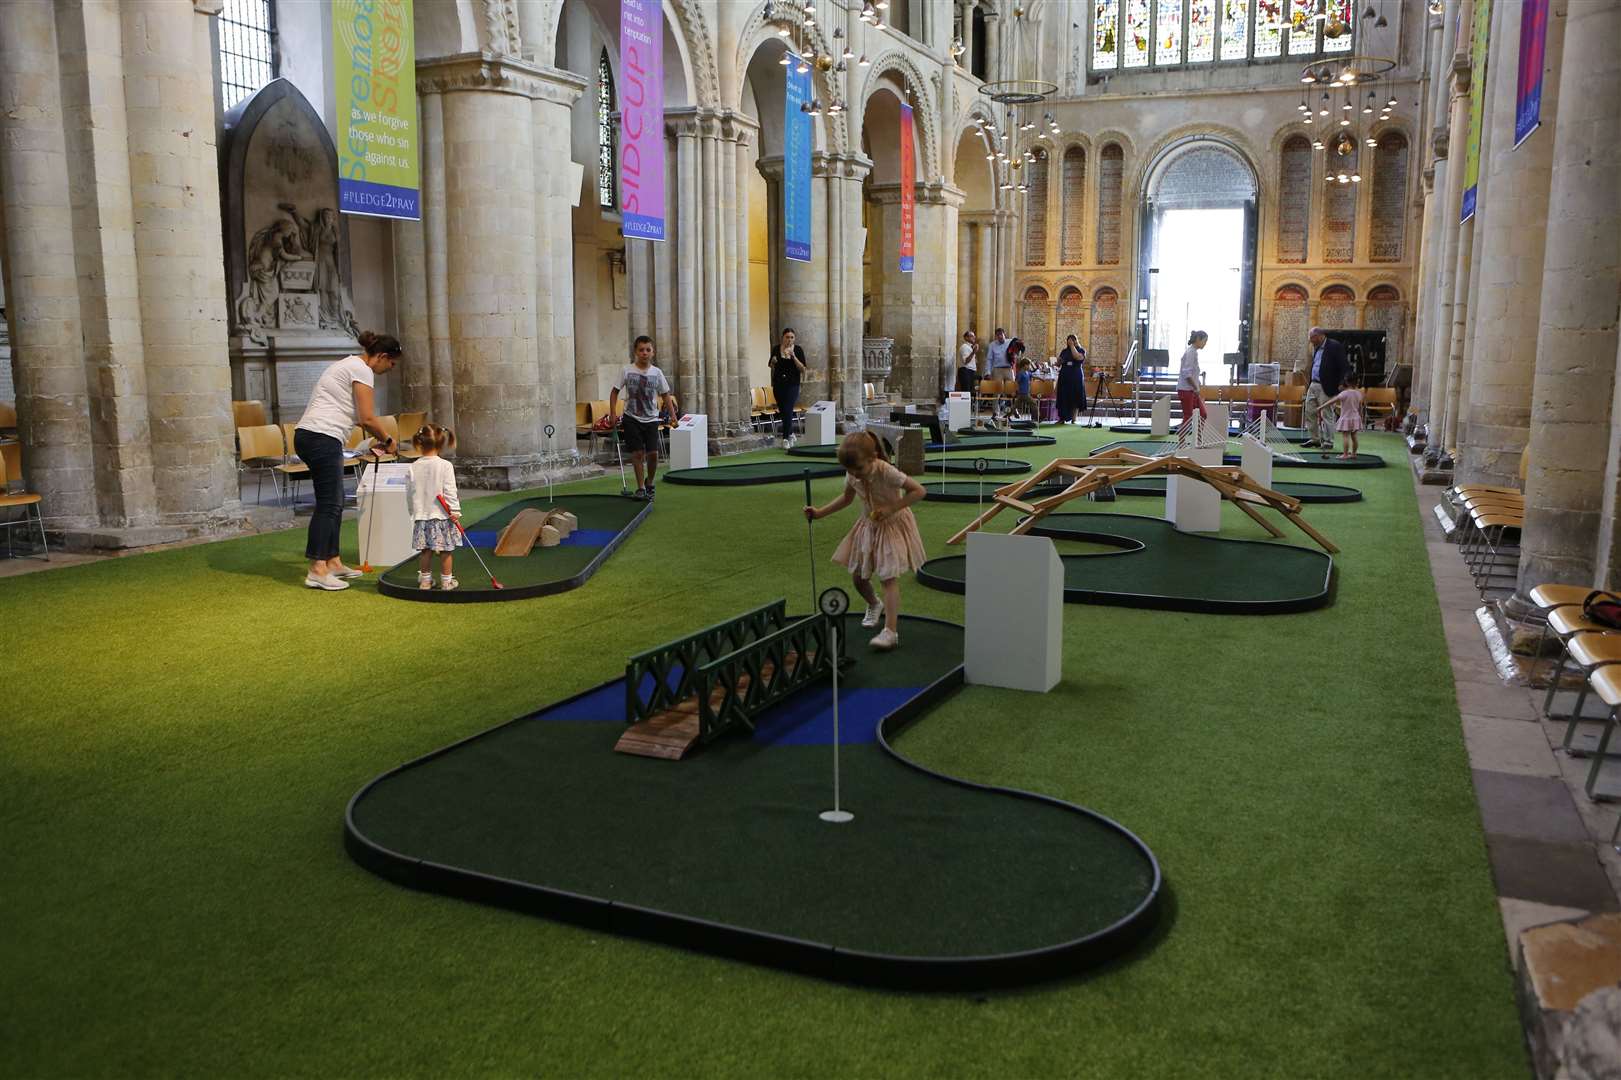 The crazy golf course at the cathedral in 2019 Picture: Andy Jones